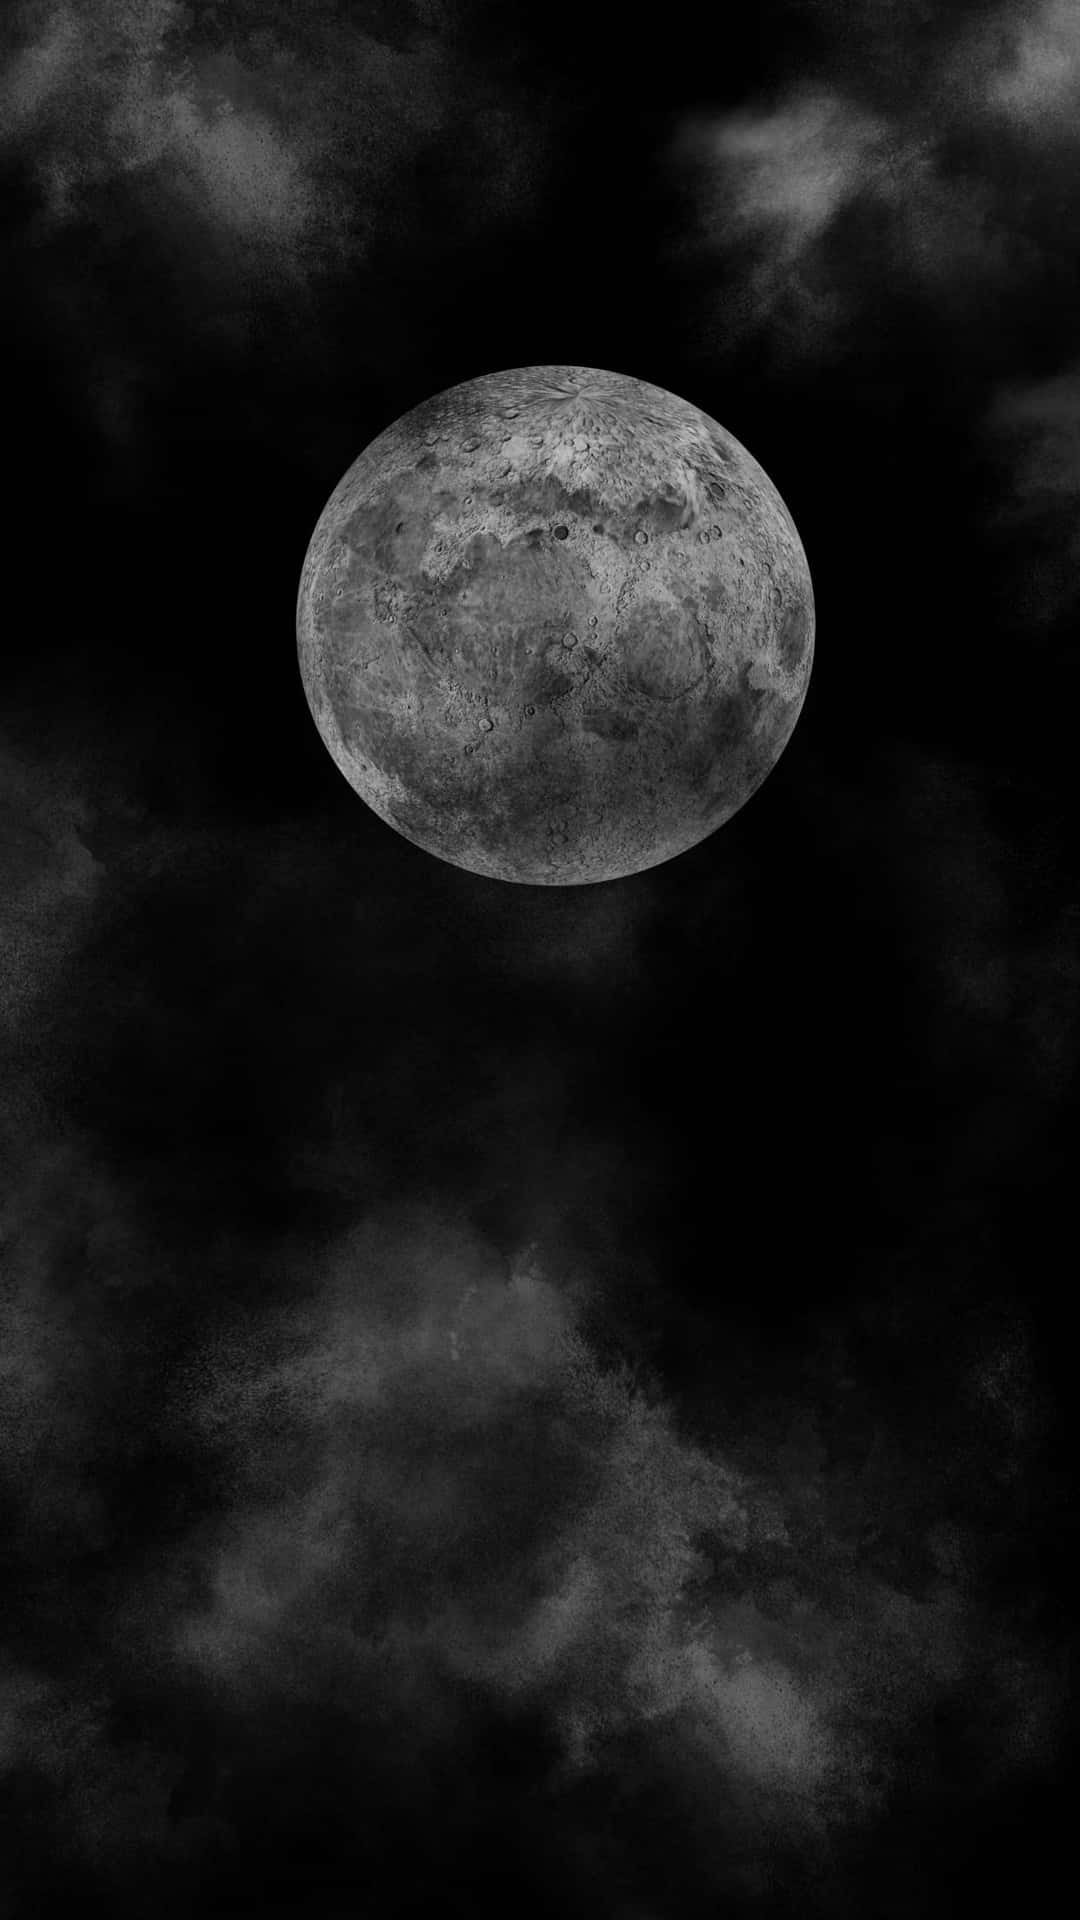 Mysterious iPhone Wallpaper - iPhone Wallpapers